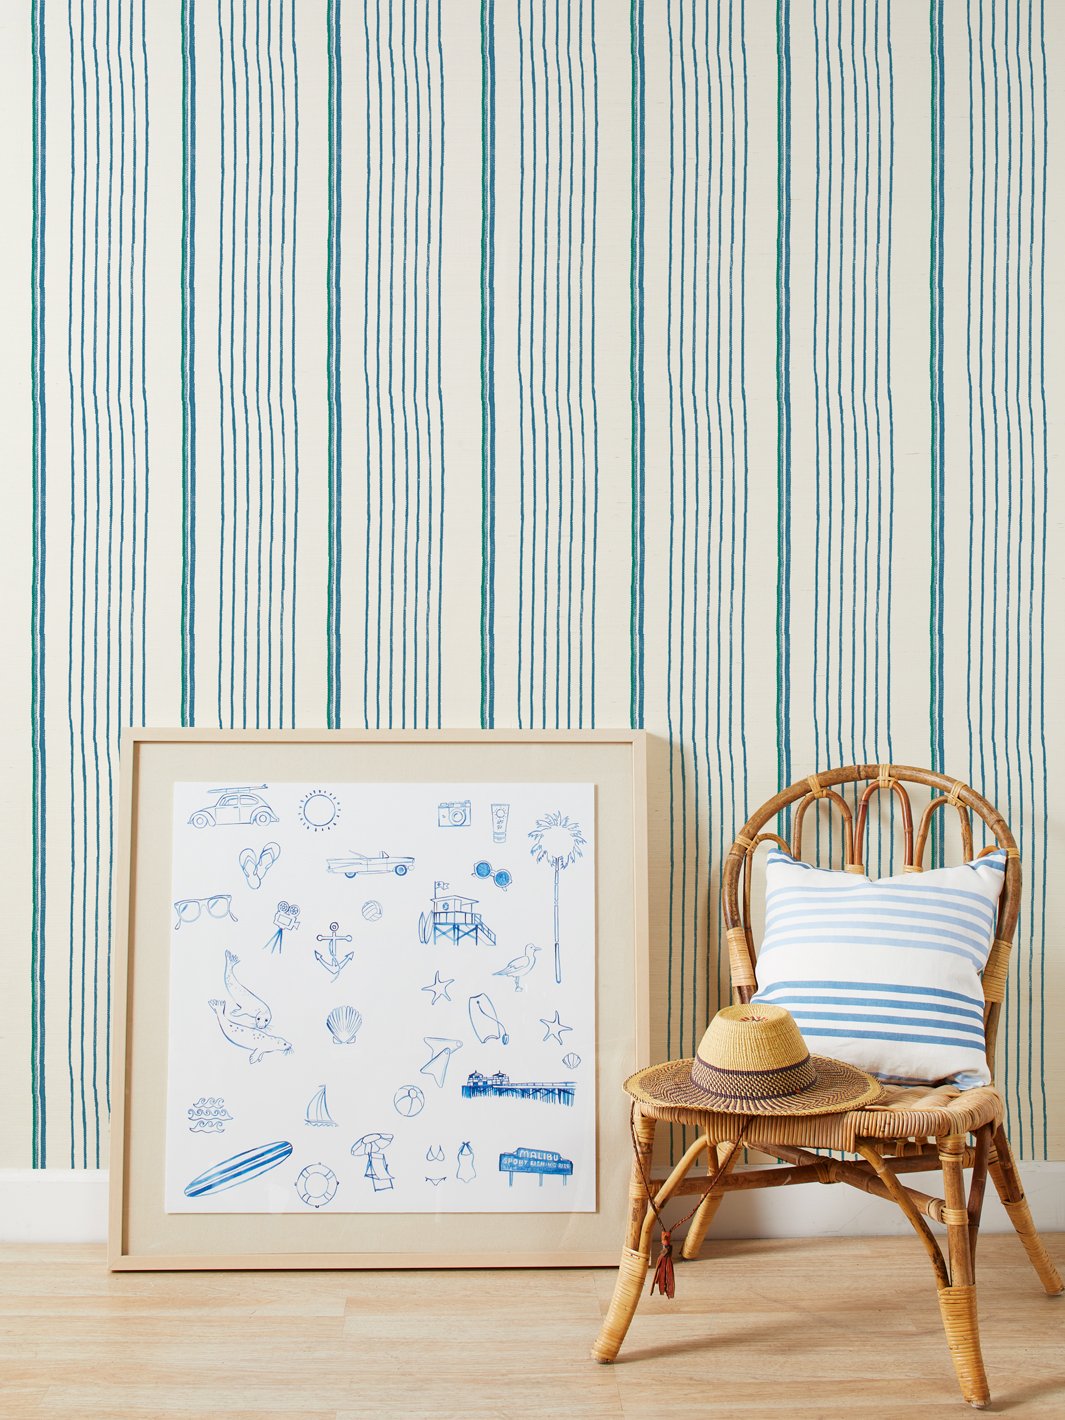 'Two Tone Stripe' Grasscloth' Wallpaper by Nathan Turner - Sea Green Blue